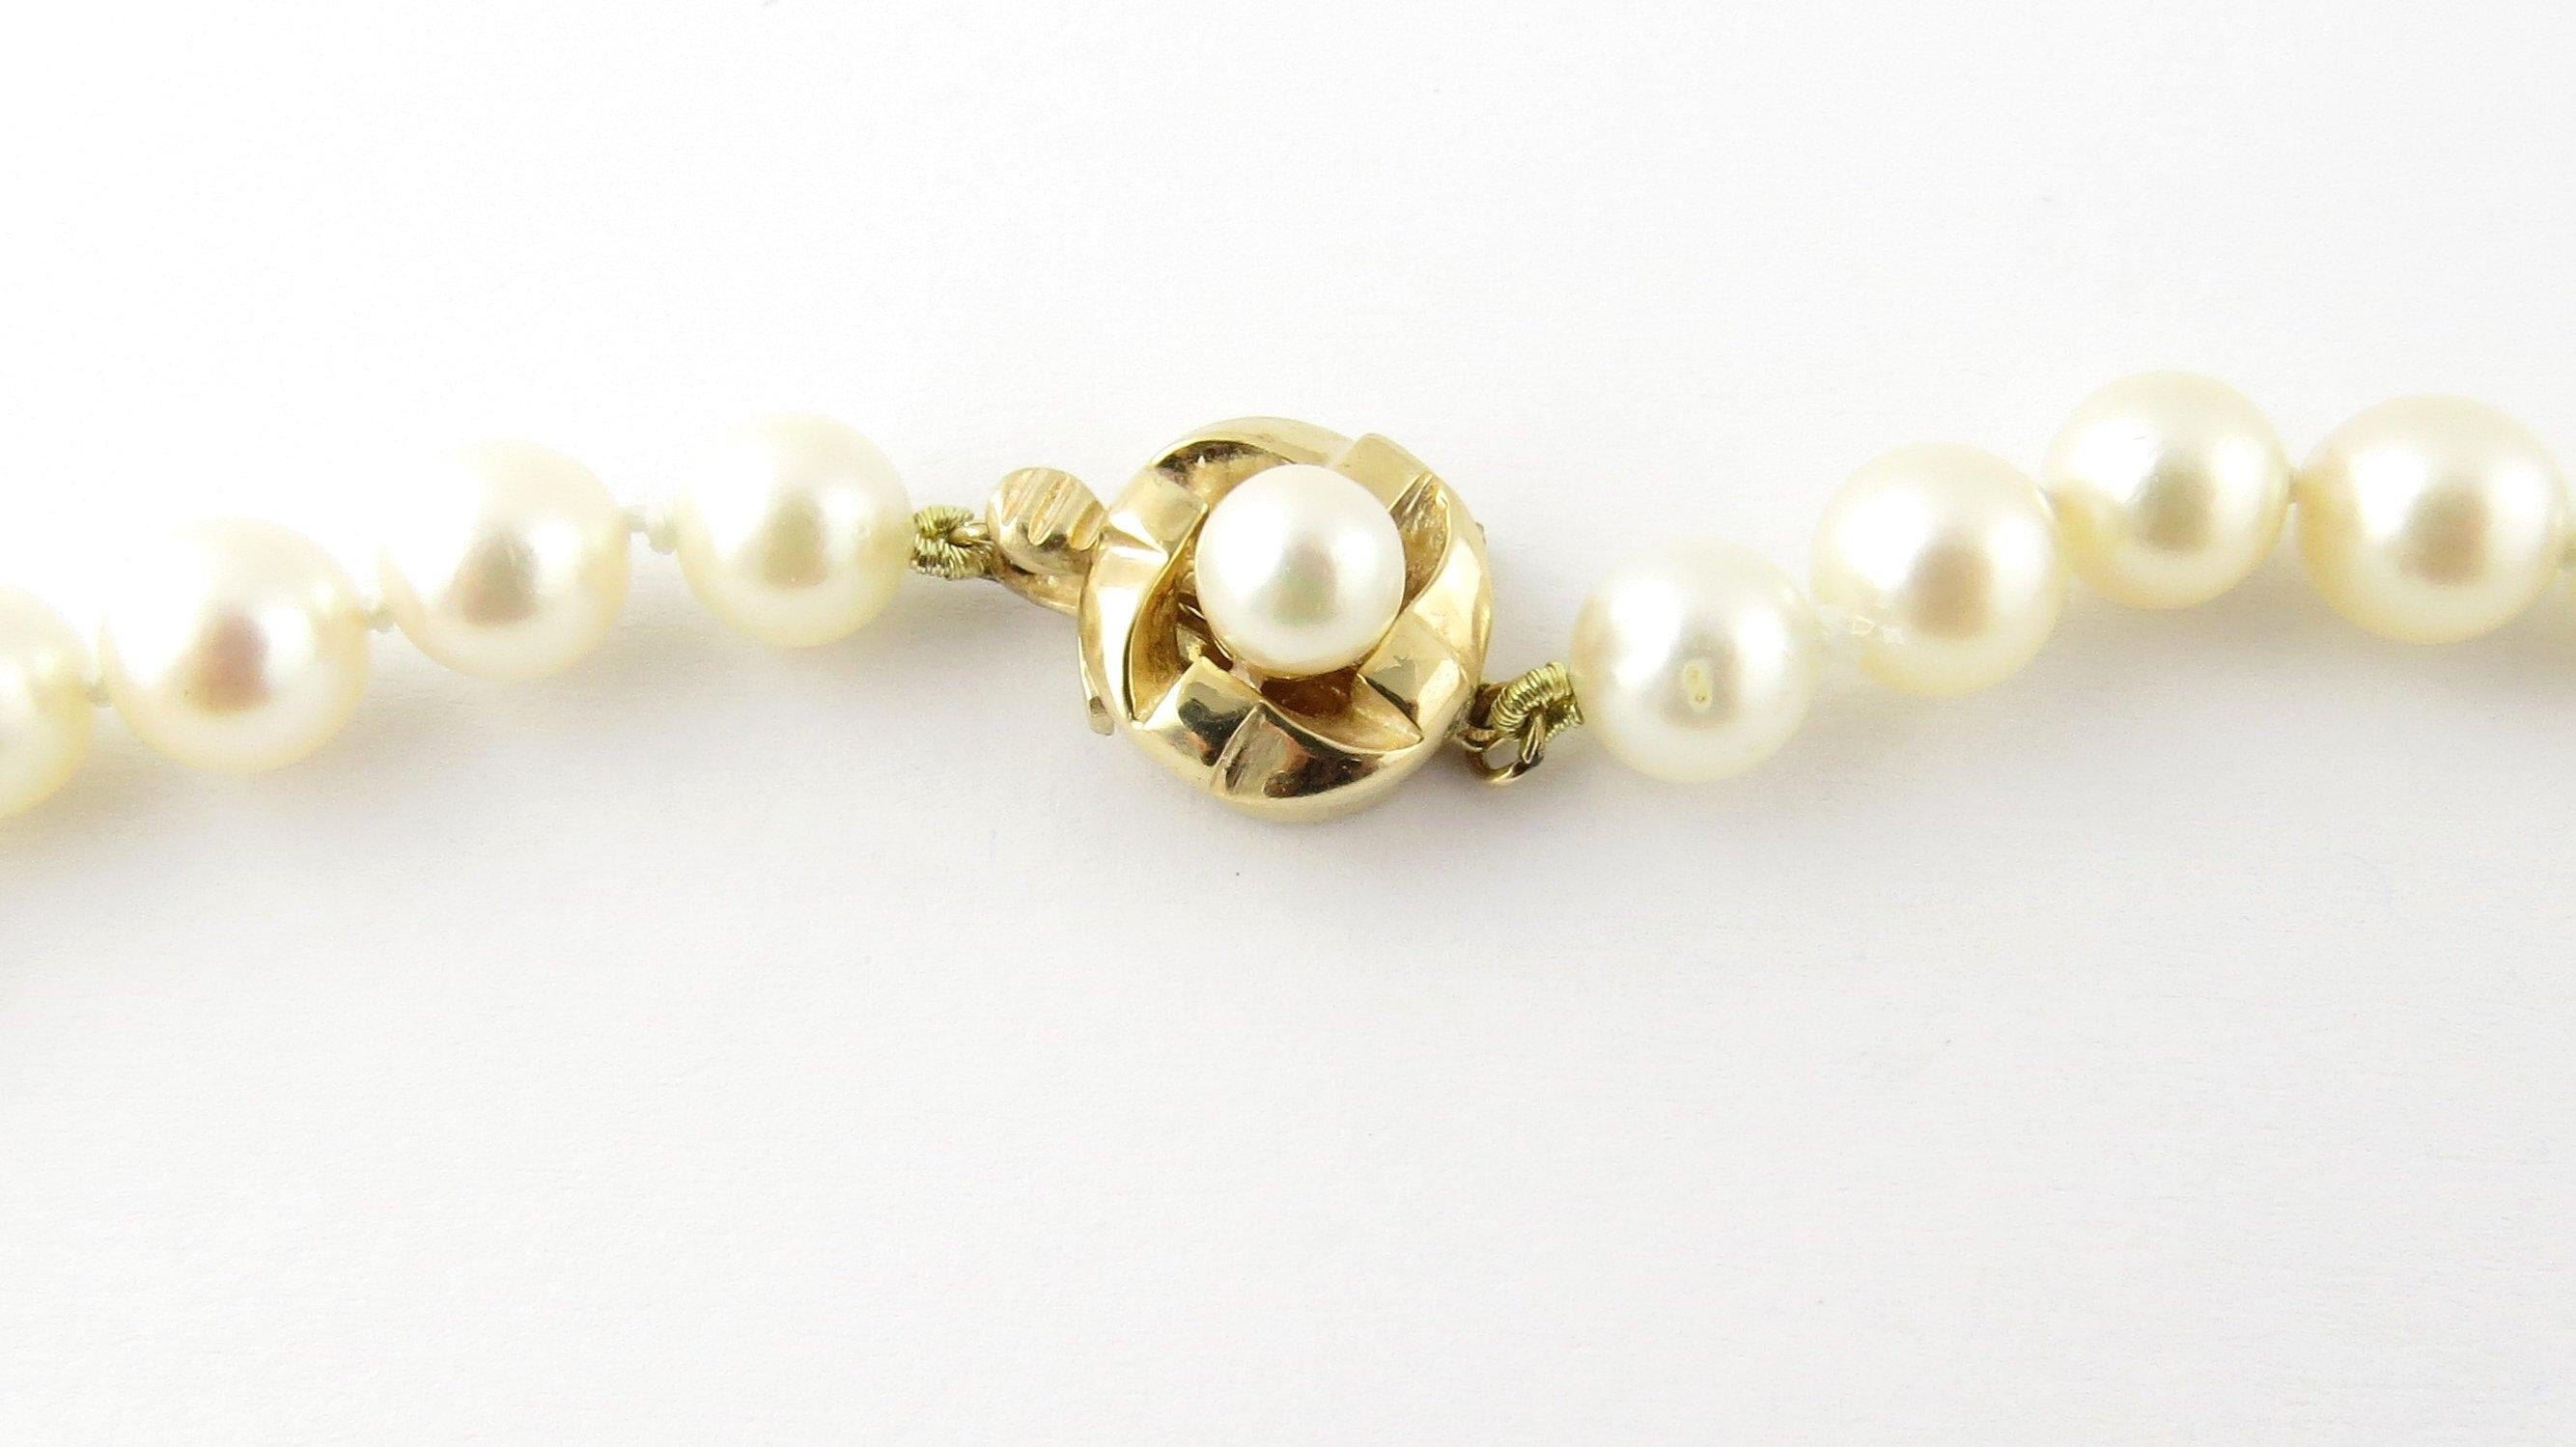 Vintage Pearl Necklace with 14 Karat Yellow Gold Closure
This elegant strand of 61 pink/white pearls features a lovely 14K yellow gold and pearl closure. Each pearl measures 6.5 mm - 7 mm. *Some minor imperfections noted to a few pearls; Lustre is